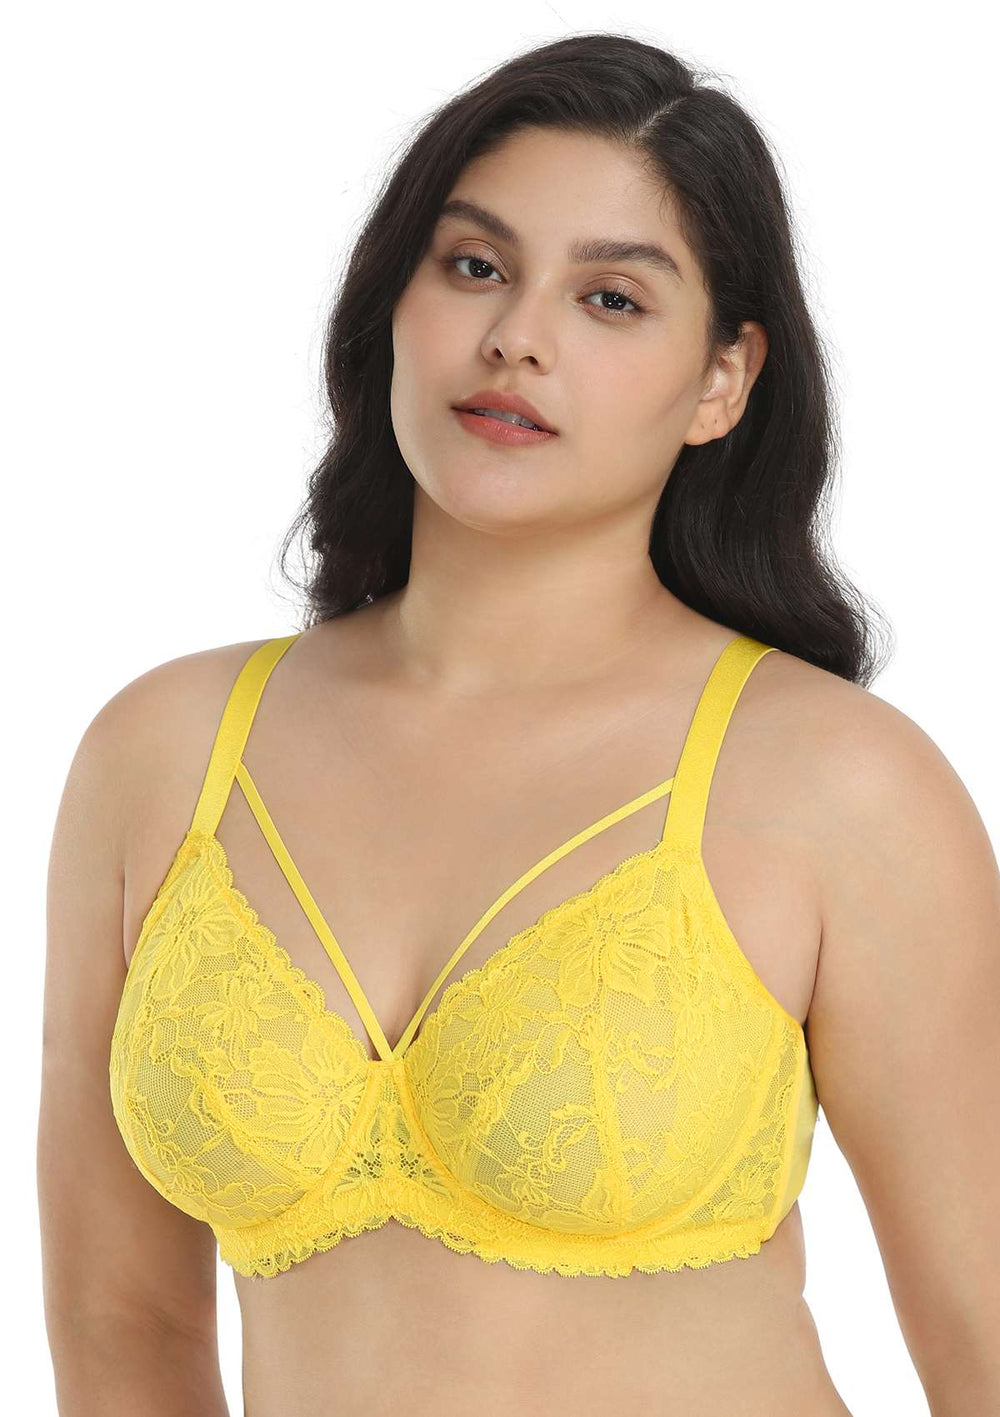 Where can you get lace bralettes? - Quora